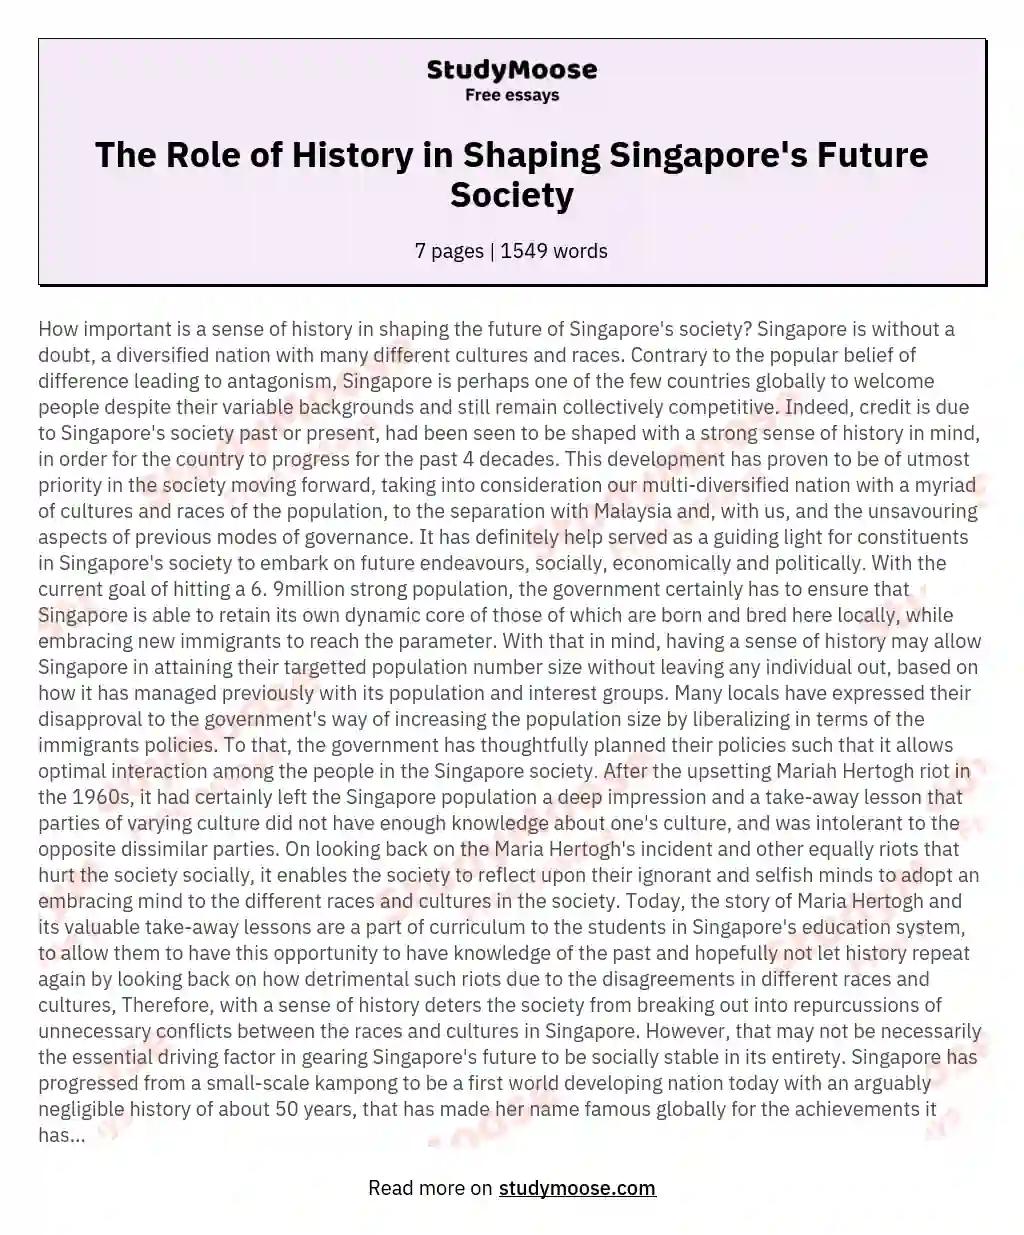 The Role of History in Shaping Singapore's Future Society essay